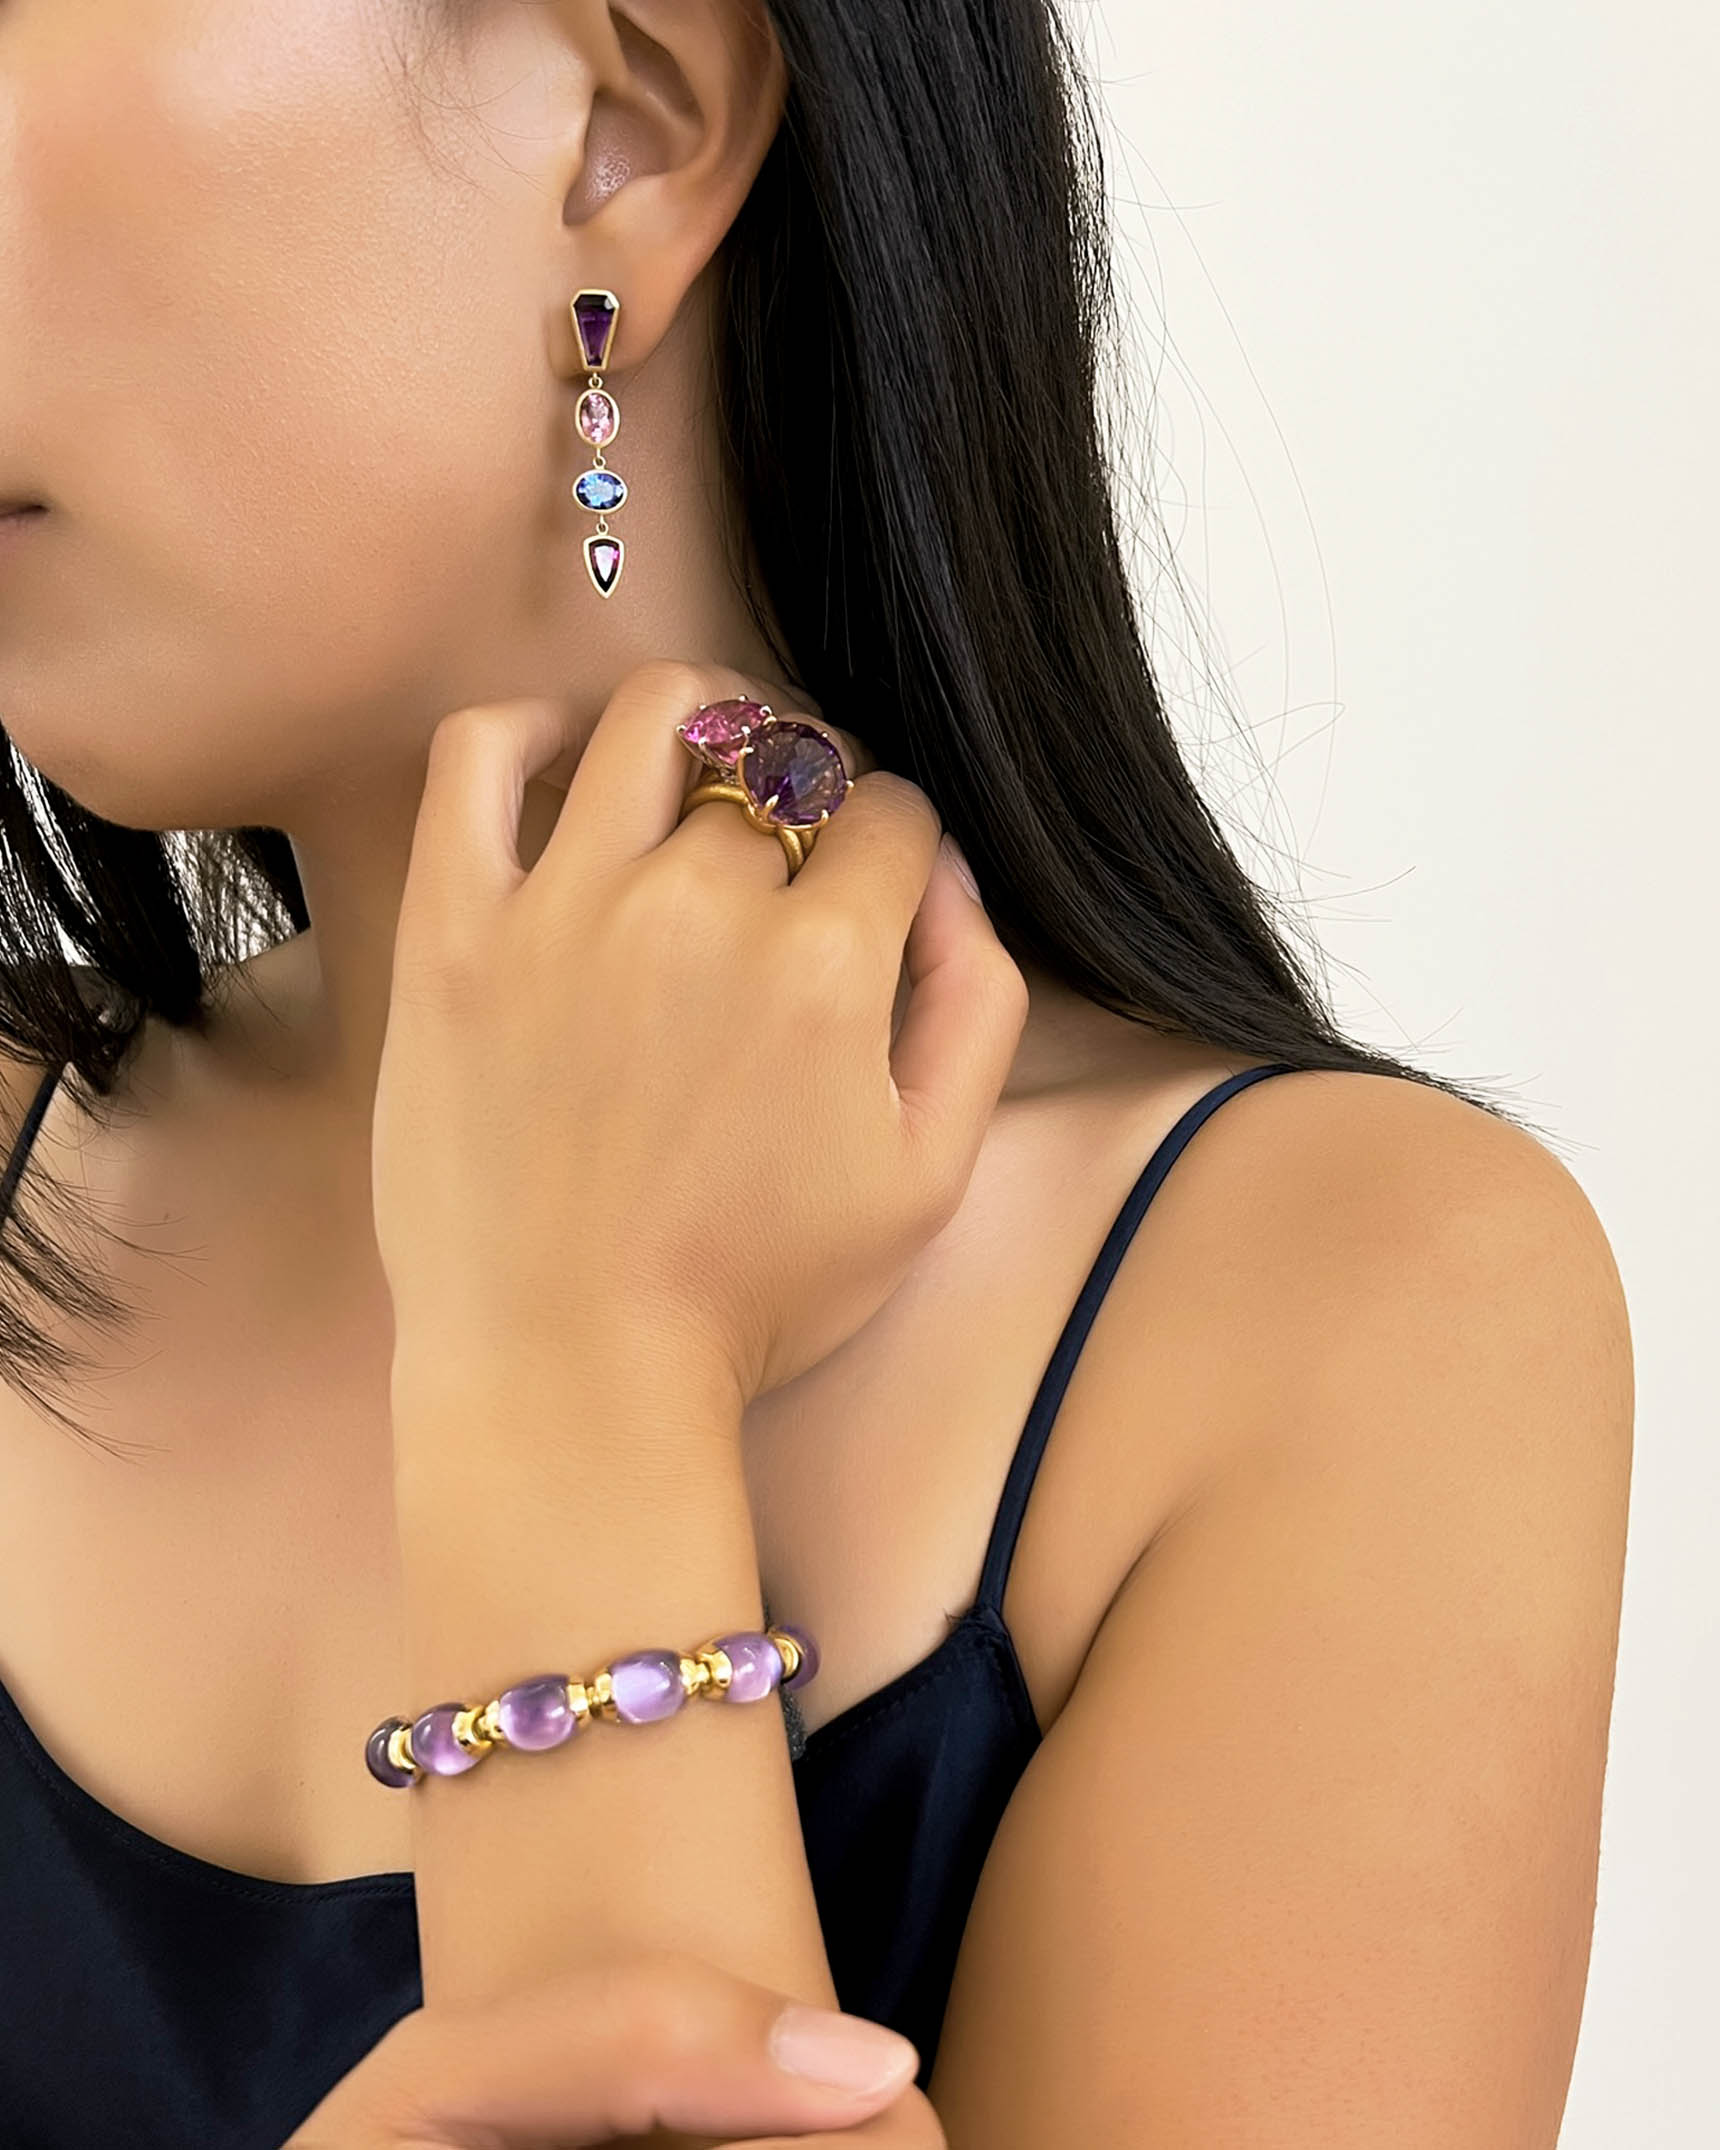 Cabochon Amethyst and Yellow Gold Bracelet_Rings and Earrings BCO3K00108 – RCMS03132 – RCDTO00596 – ECSTK00505 XX